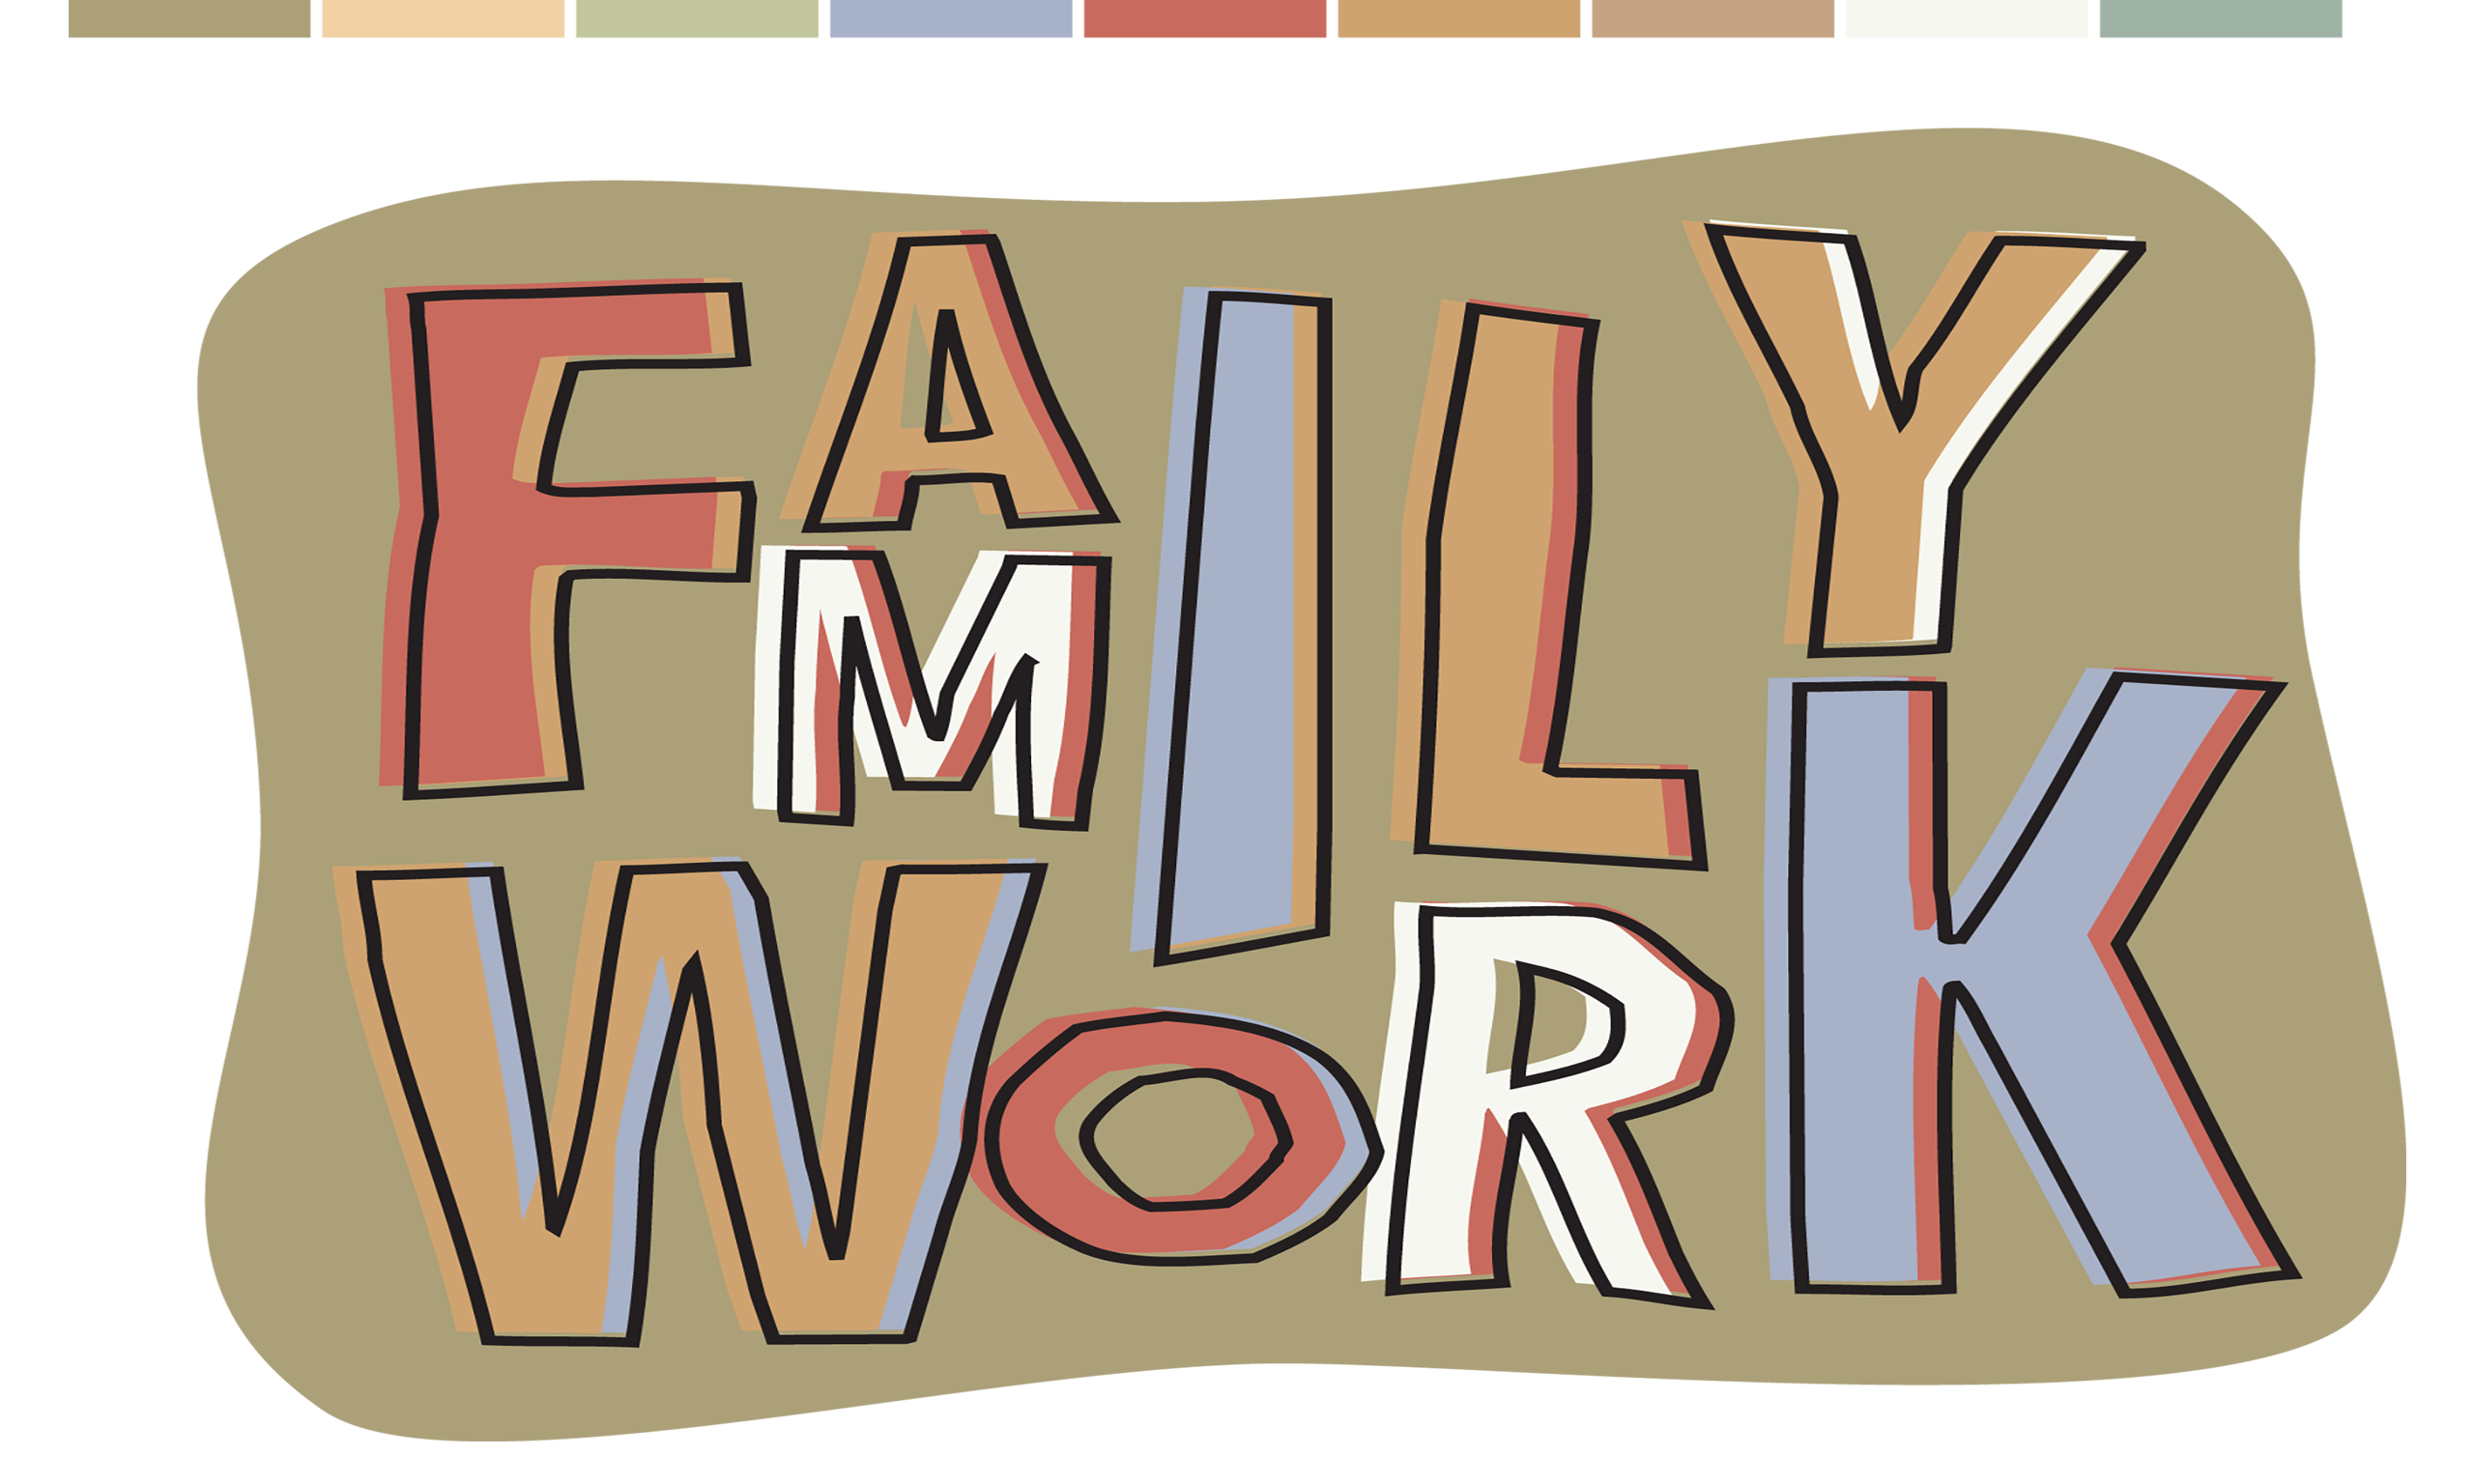 Titling for magazine article "Family Work."